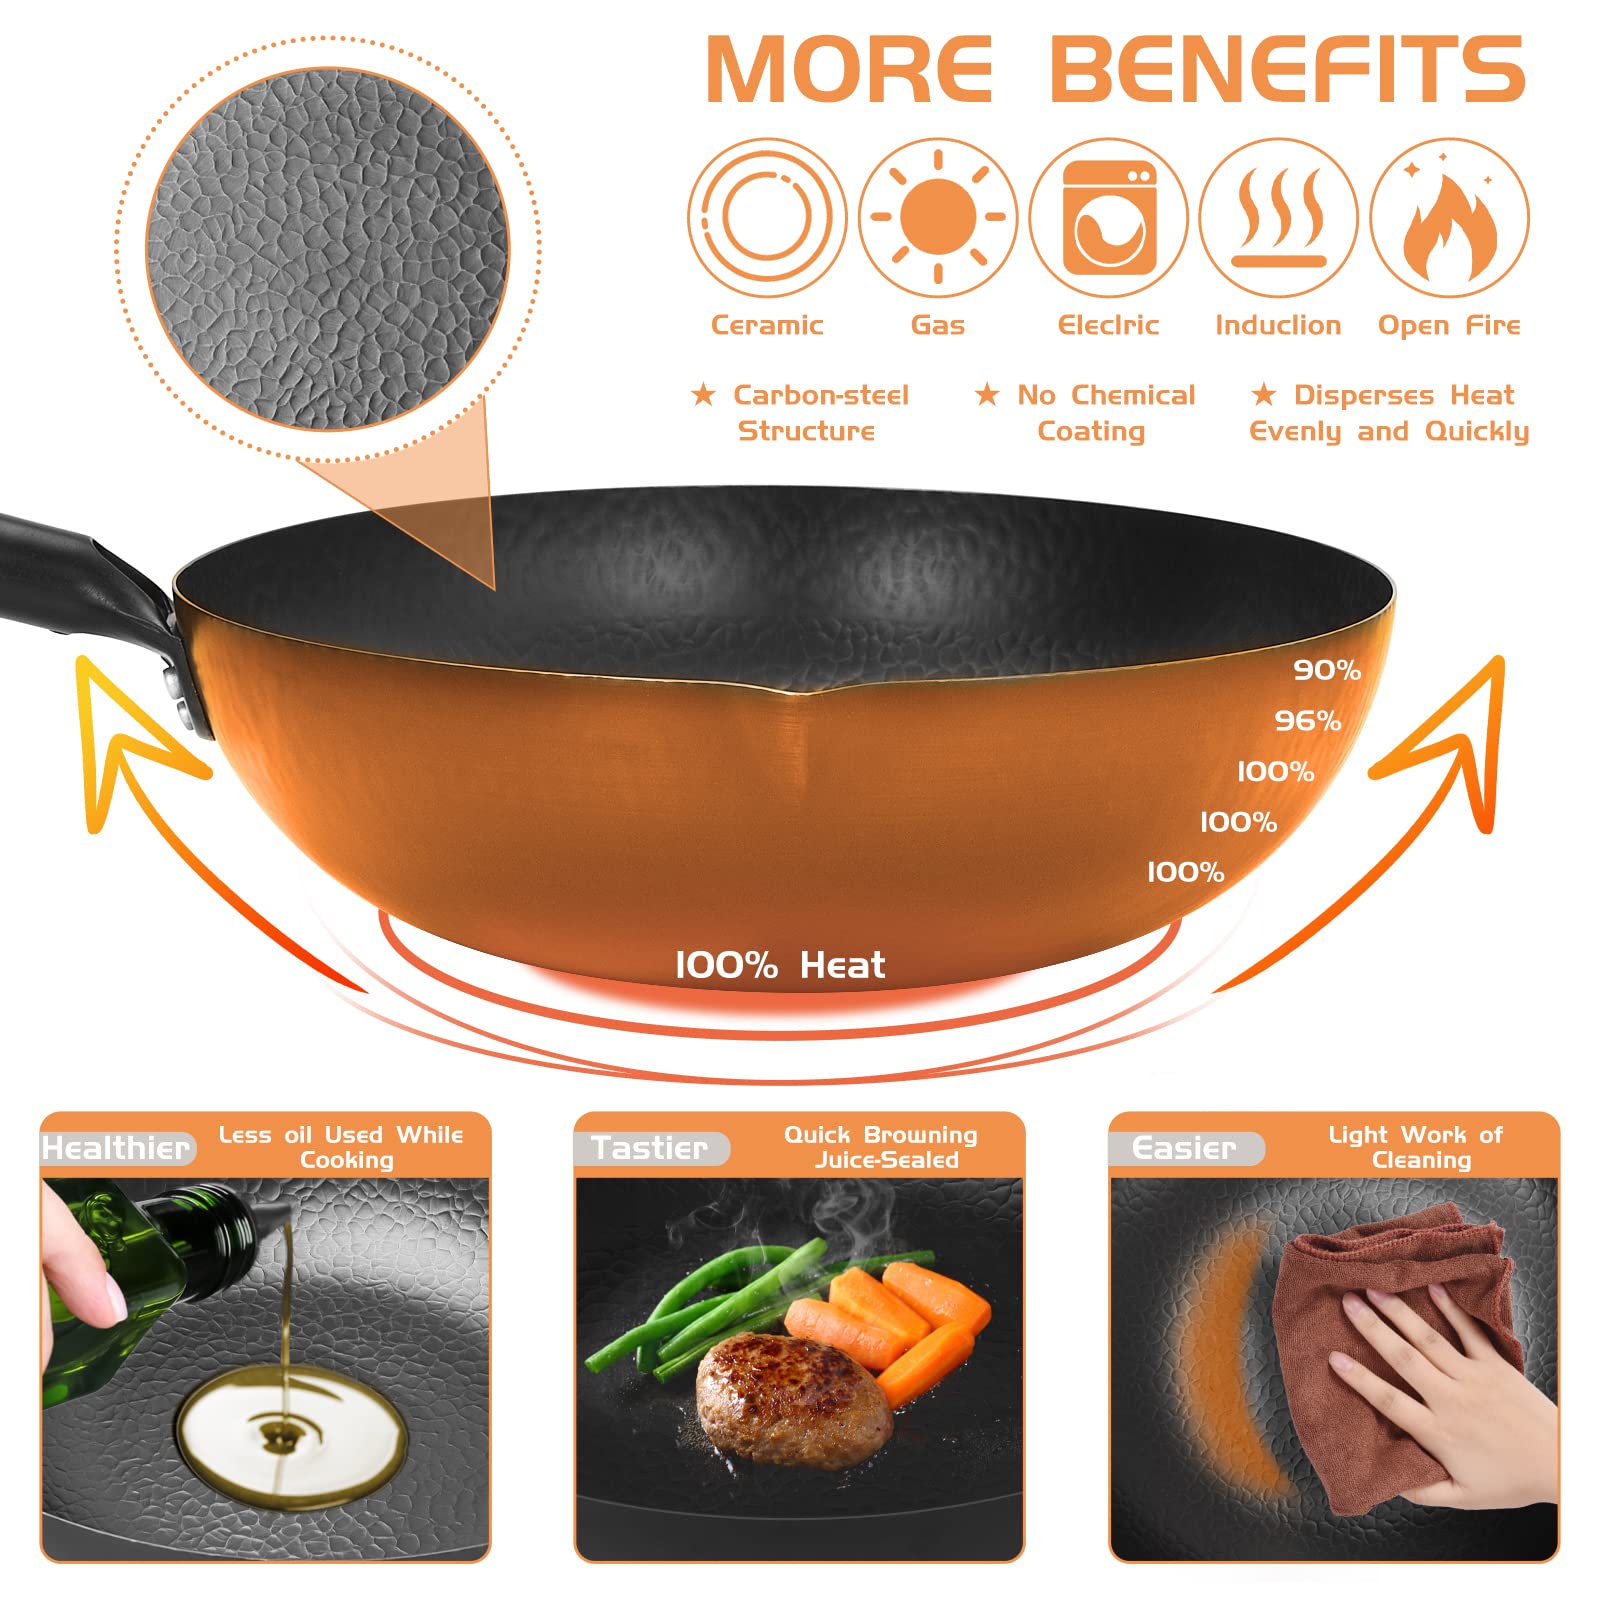 Cookeriess Hand Hammered Carbon Steel Wok, Wooden Lid Asian Spatula with Handle - Stir Fry Pan for Chinese, Japanese, and Cantonese Cuisine – Flat Bottom Wok Cooking by Cookeries / 2 Accessories